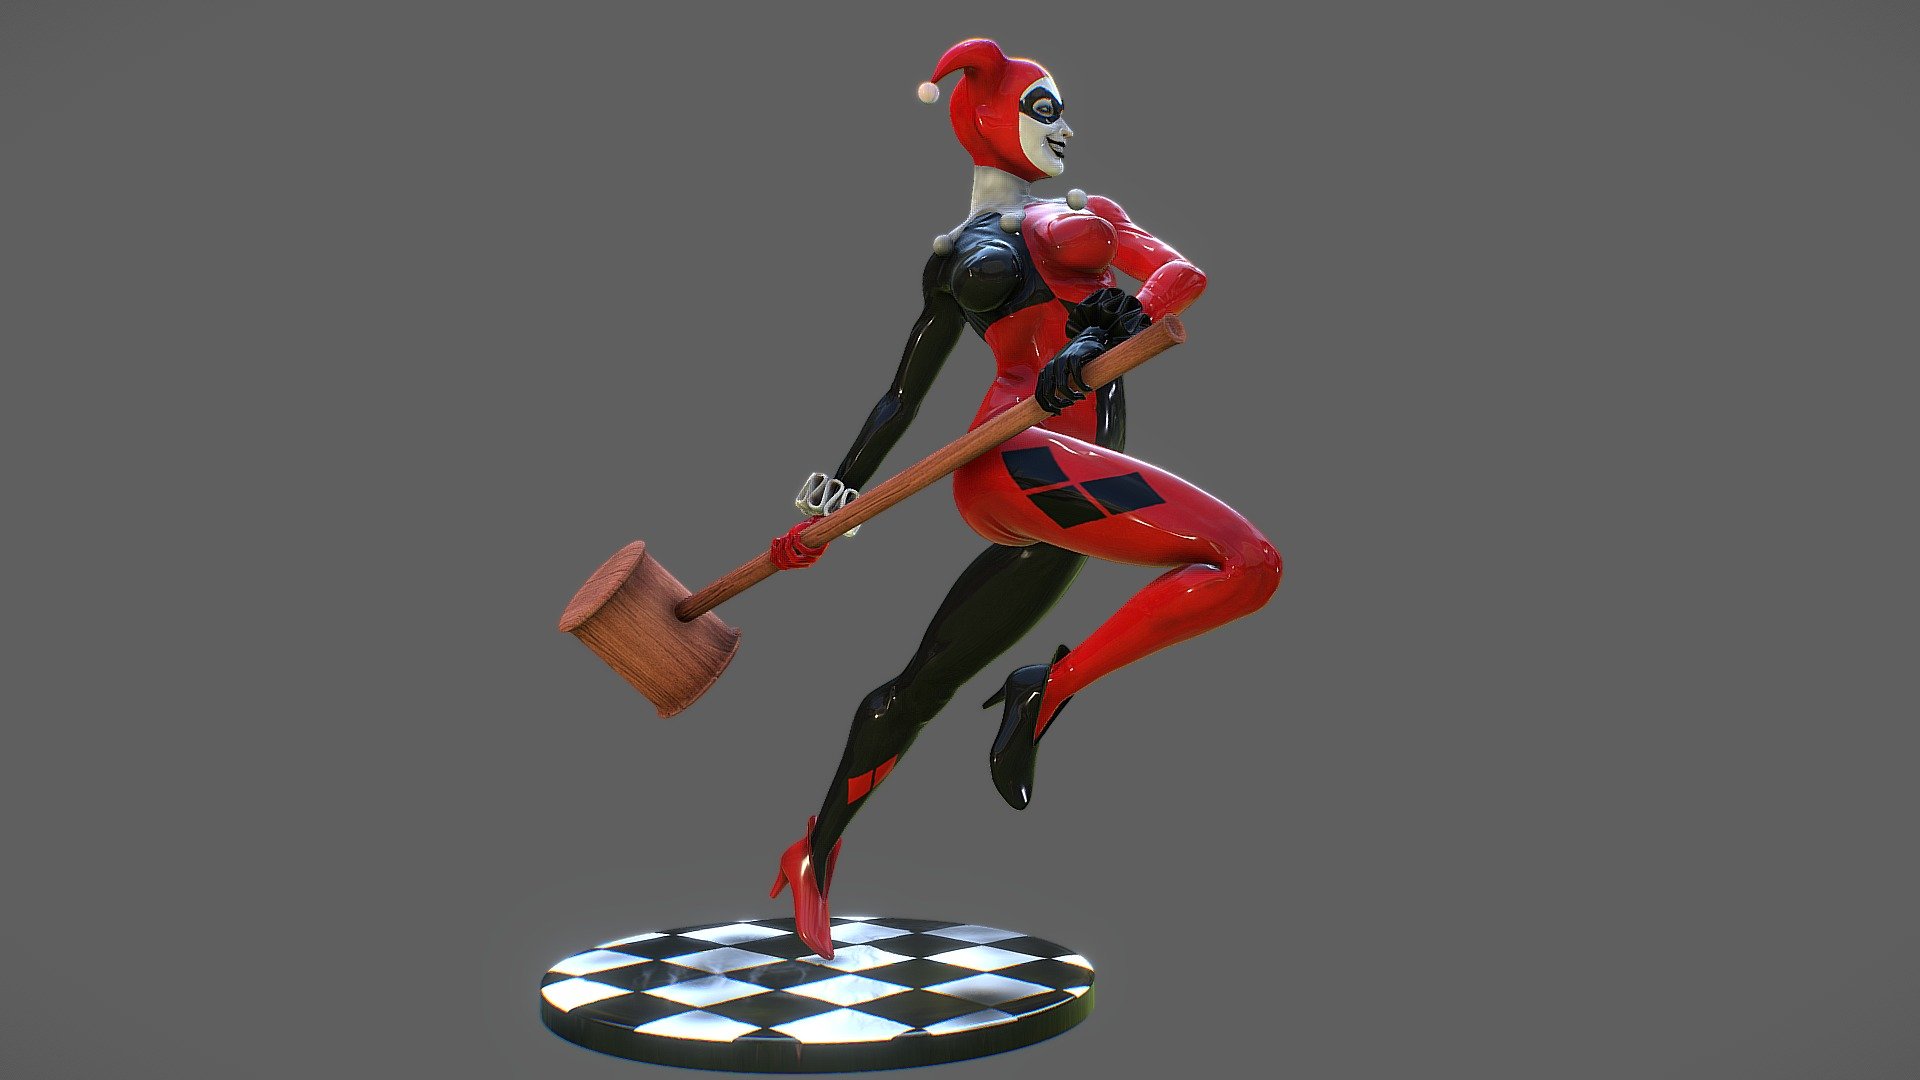 Please go to my Behance to see the Hi Poly version! 
https://www.behance.net/gallery/1072167/Harley-Quinn

thx - Harley Quinn - Buy Royalty Free 3D model by Anderson Barges (@evilschool) 3d model